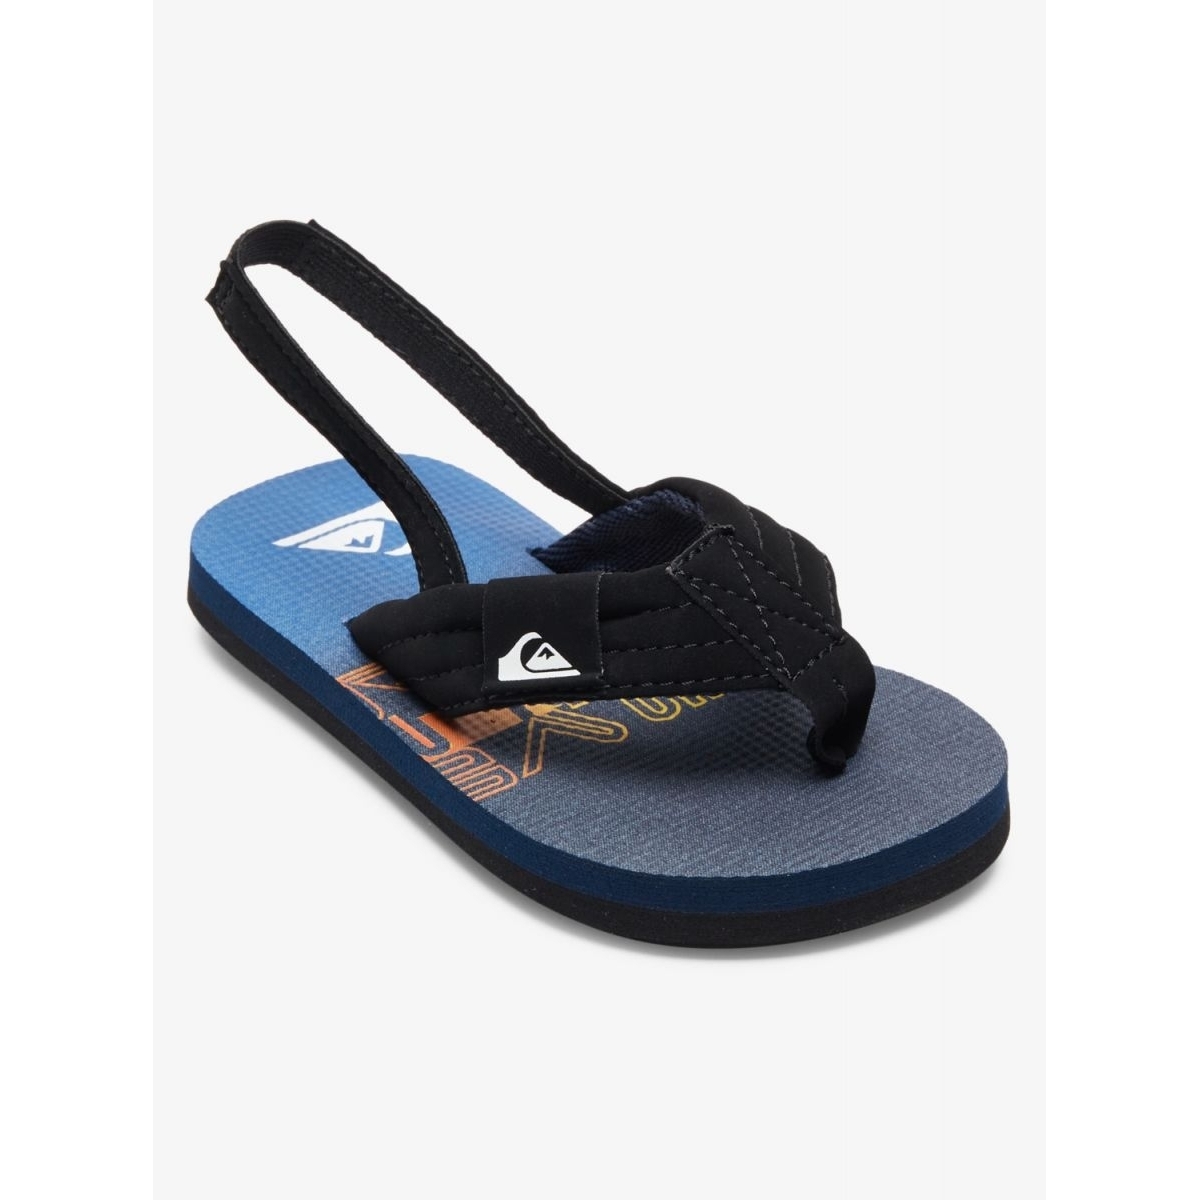 Quiksilver Toddlers' Molokai Layback Flip Flop Sandals Blue 3 - AQTL100066-BYJ3 BLUE 3 - BLUE 3, 4 Toddler